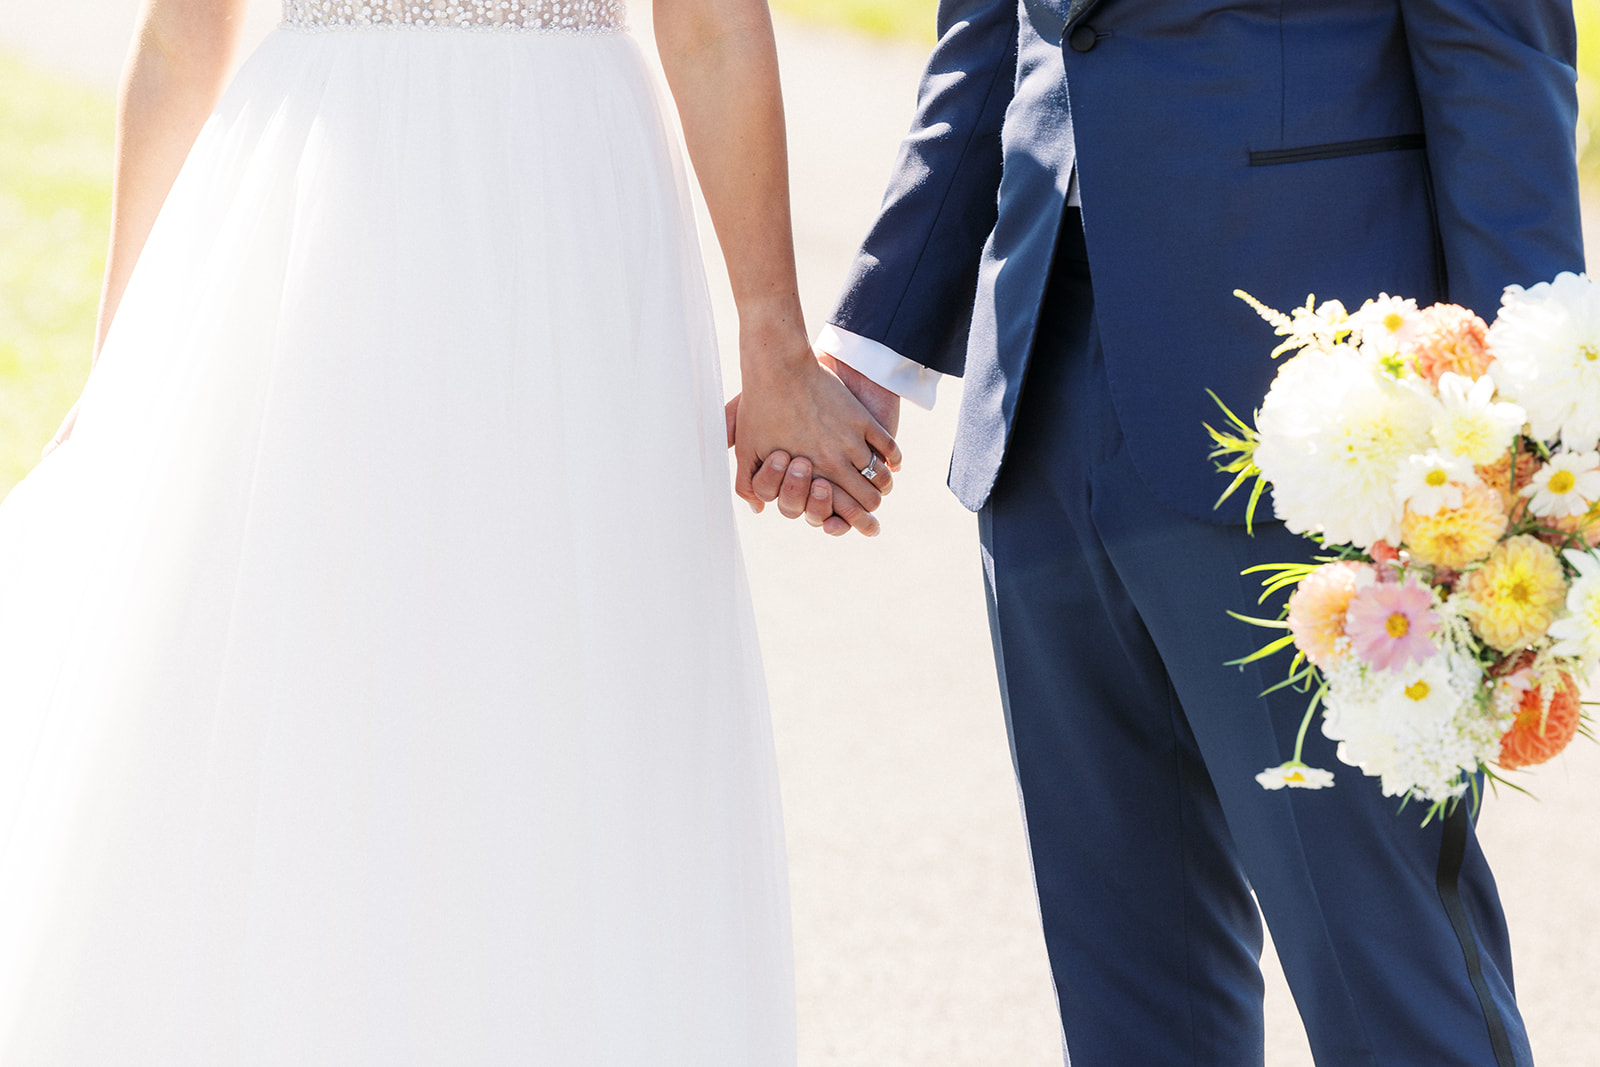 Details of newlyweds holding hands while walking down a sidewalk at a Birchwood Manor Wedding